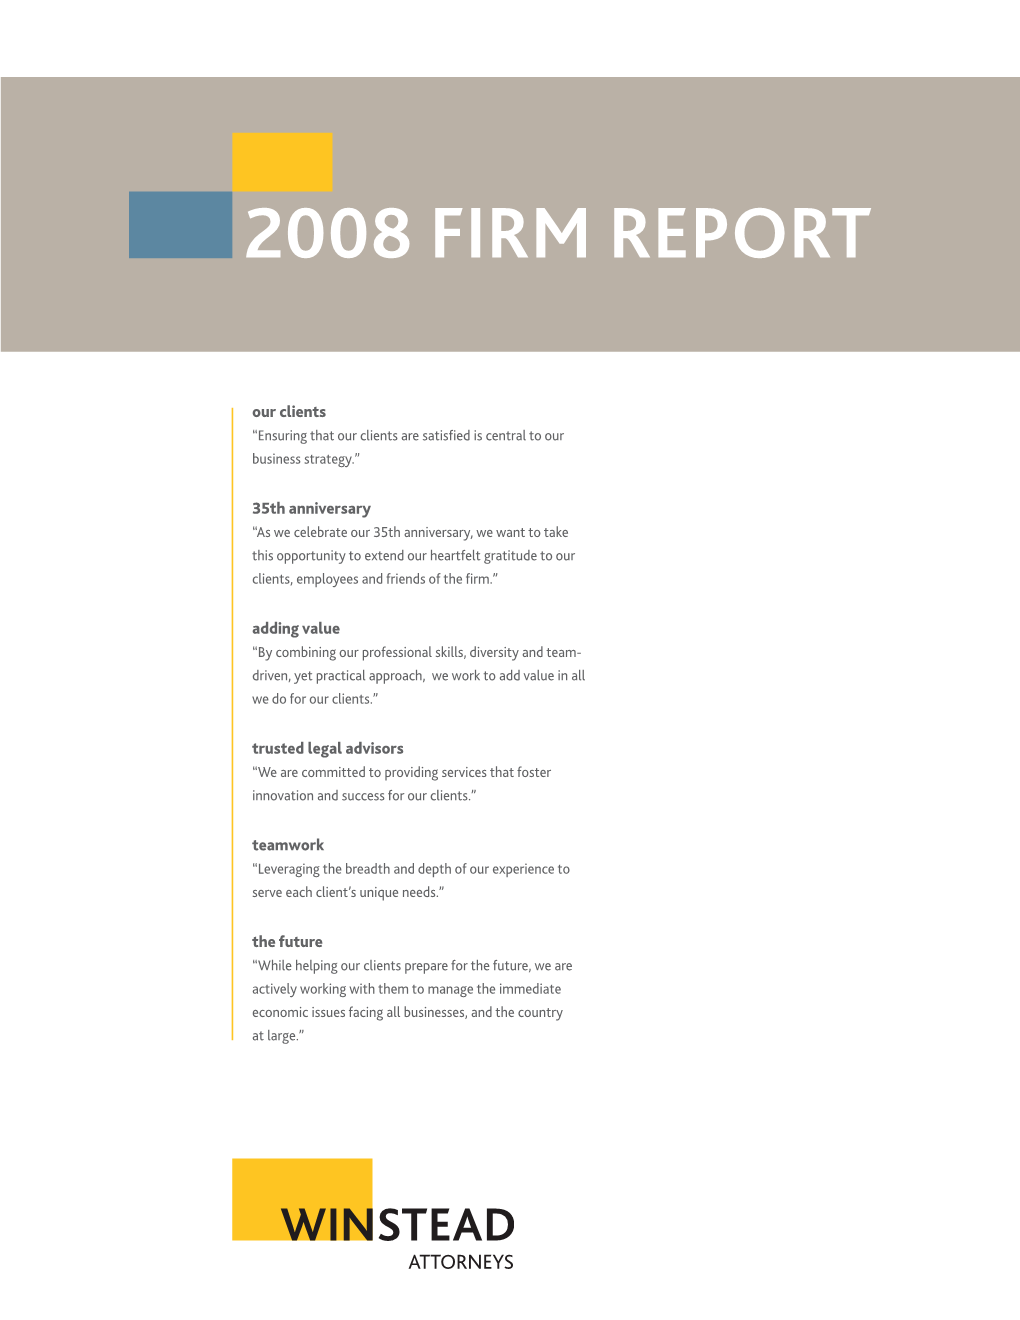 2008 Firm Report